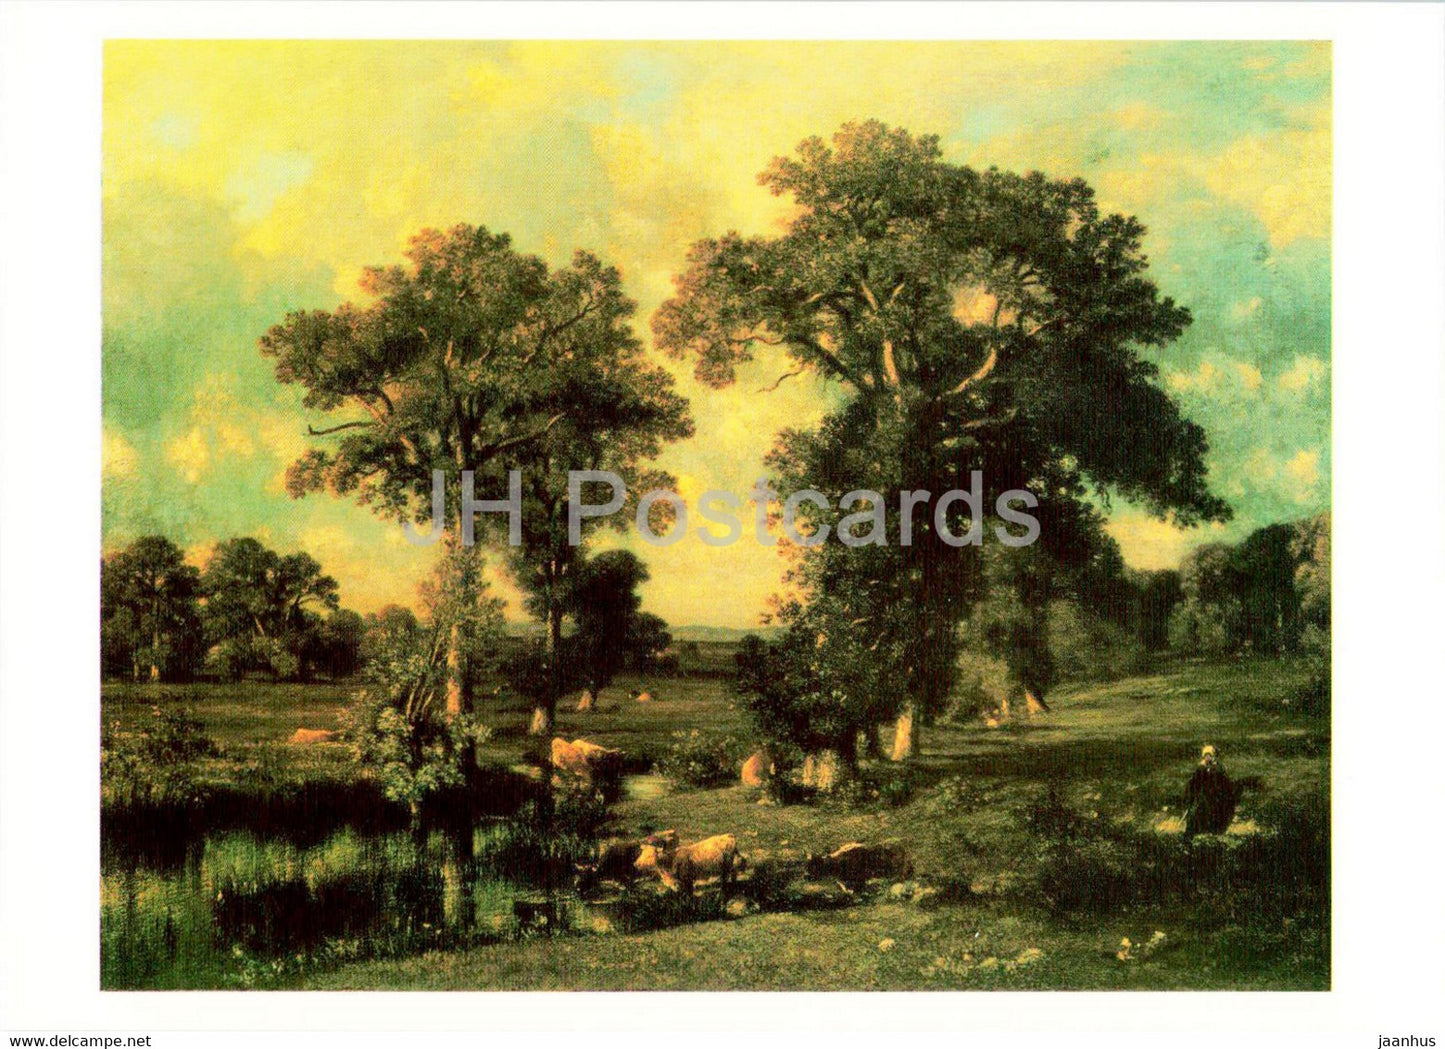 painting by Jules Dupre - Landscape with cows - French art - 1983 - Russia USSR - unused - JH Postcards